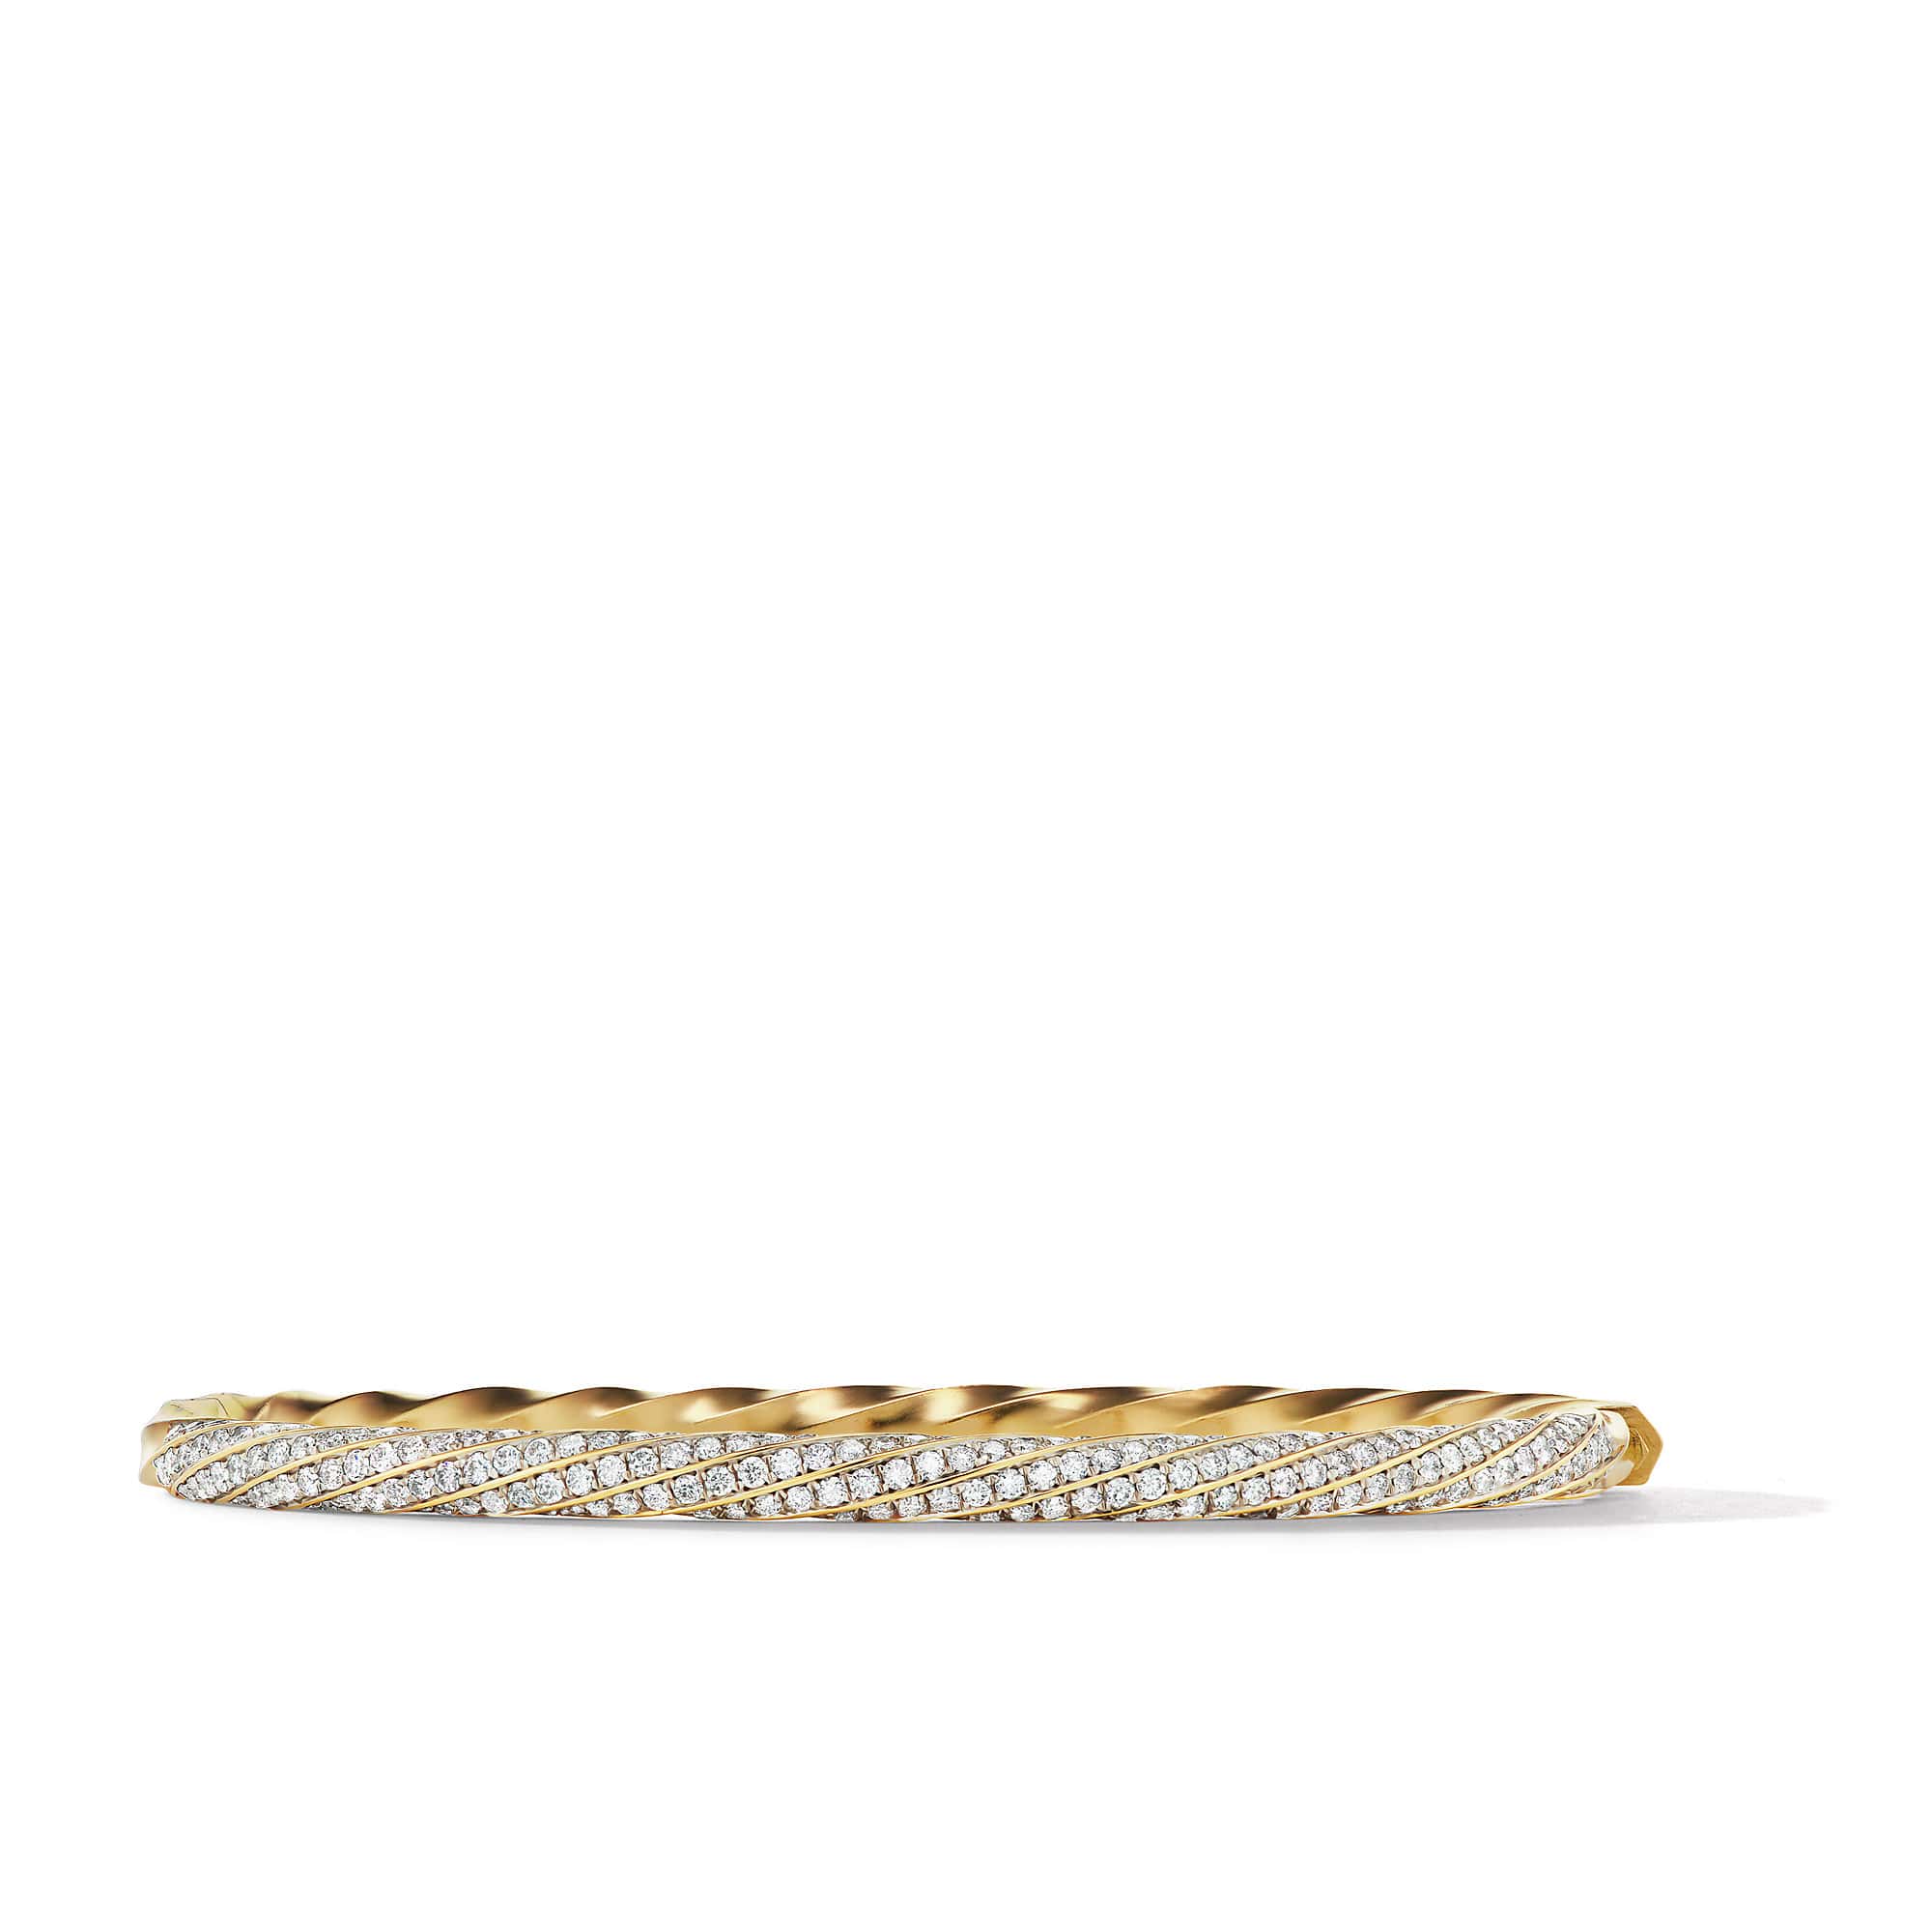 Cable Edge Bracelet in Recycled 18ct Yellow Gold with Full Pavé Diamonds - Size M